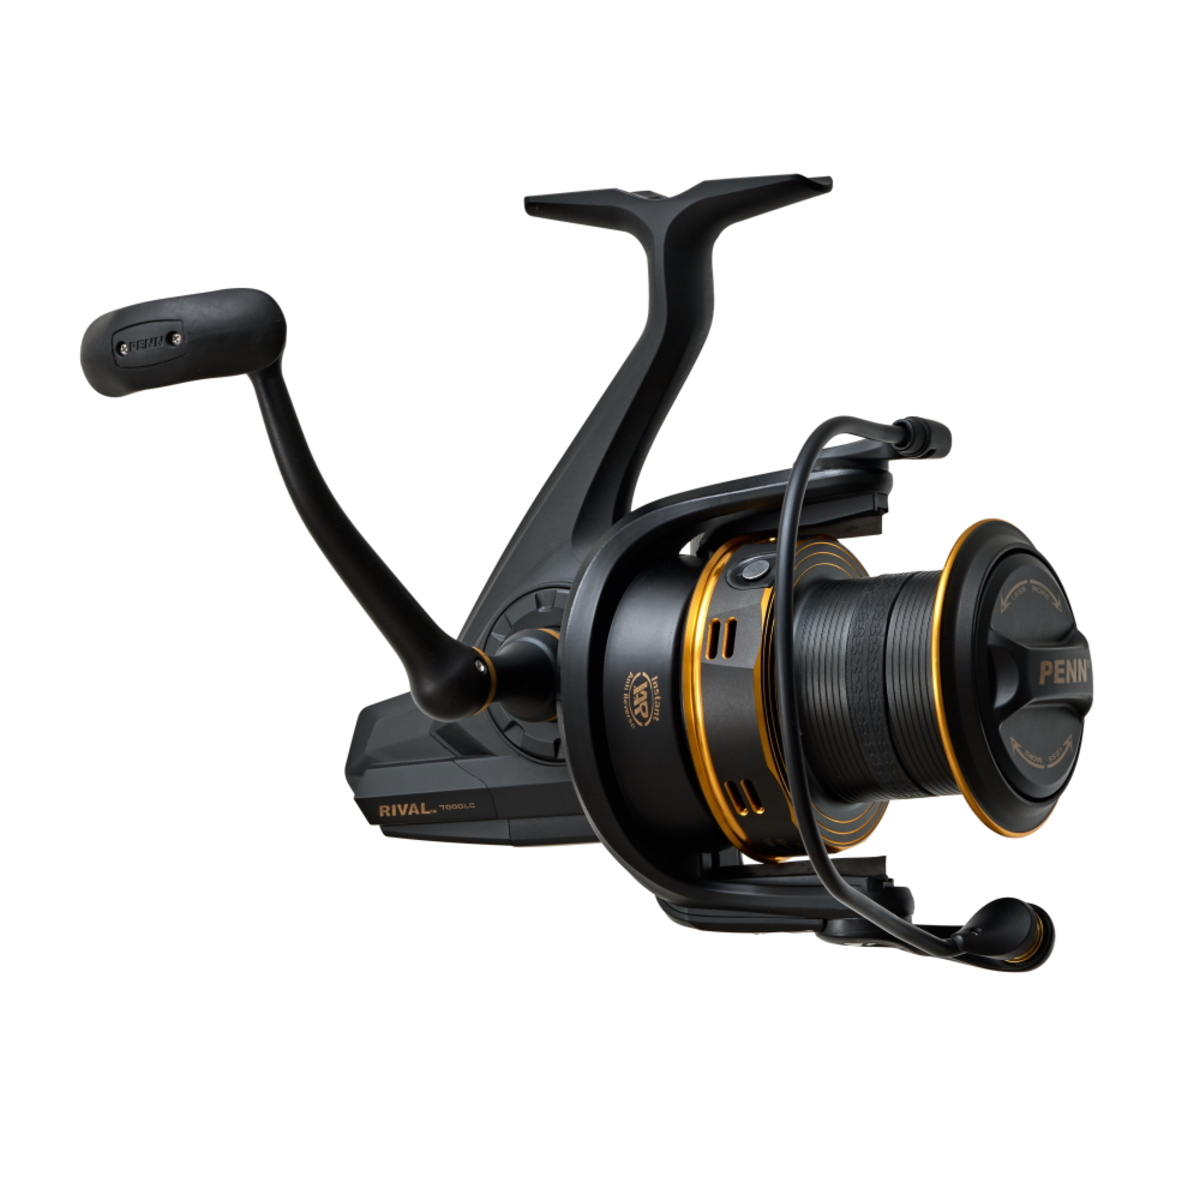 Penn Surf Battle 7000 Longcast Spinning Fishing Reel ( Without